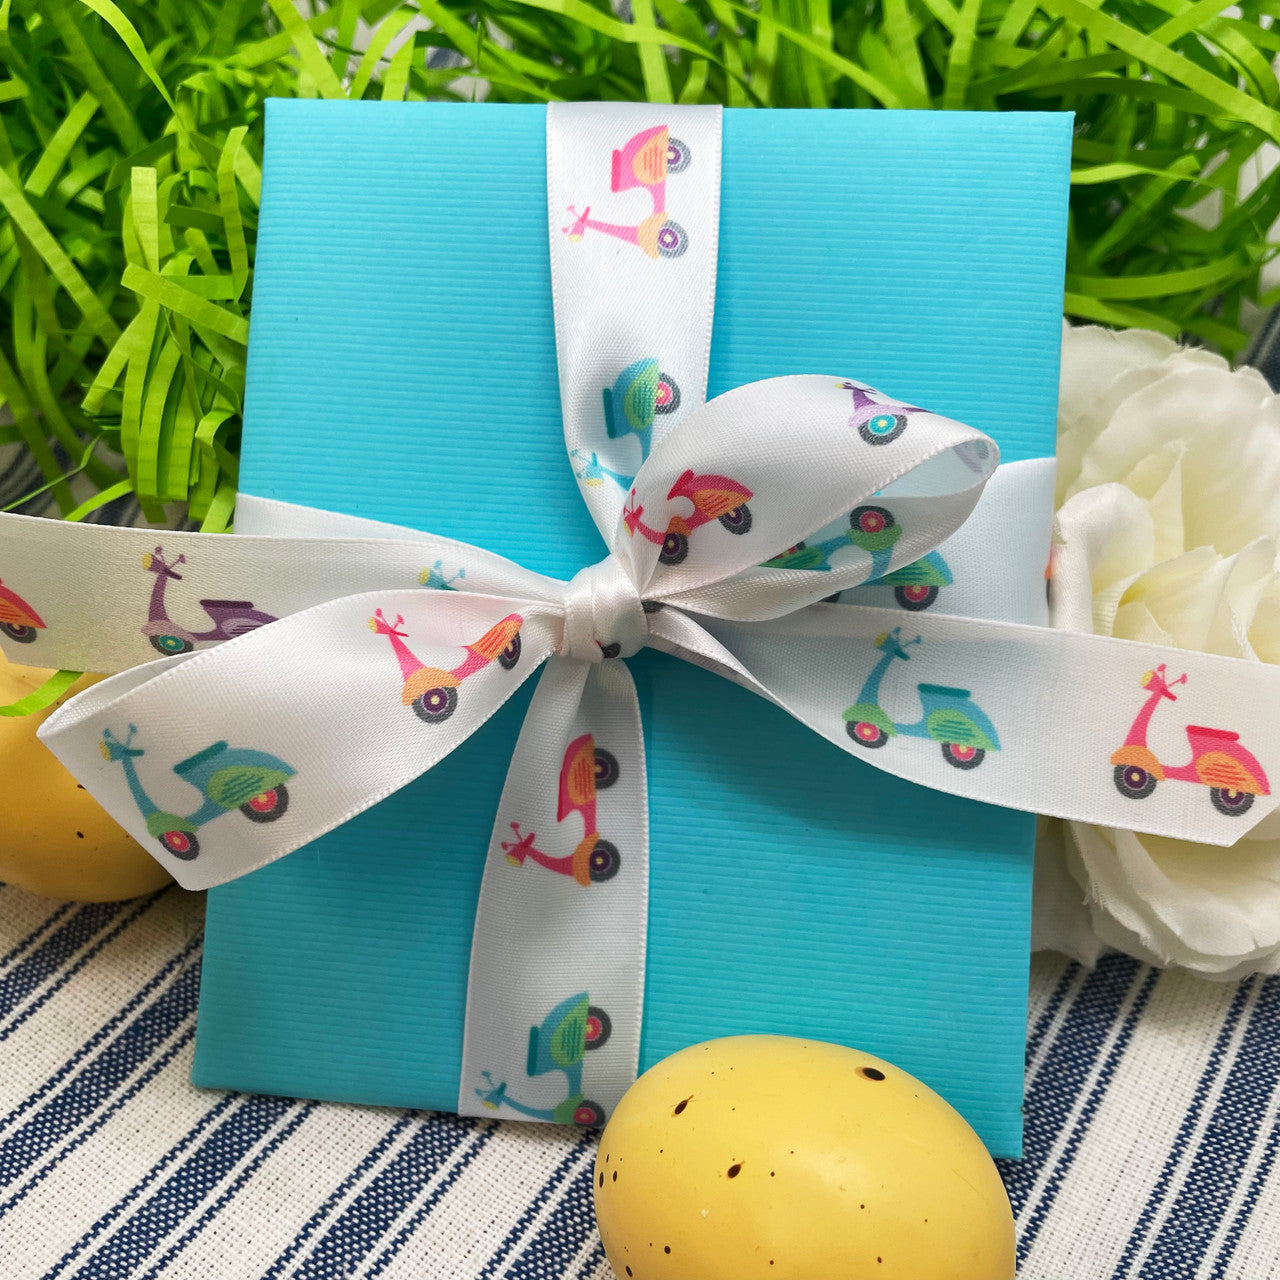 Tie a pretty bow to make the cutest package for a Summer soiree!